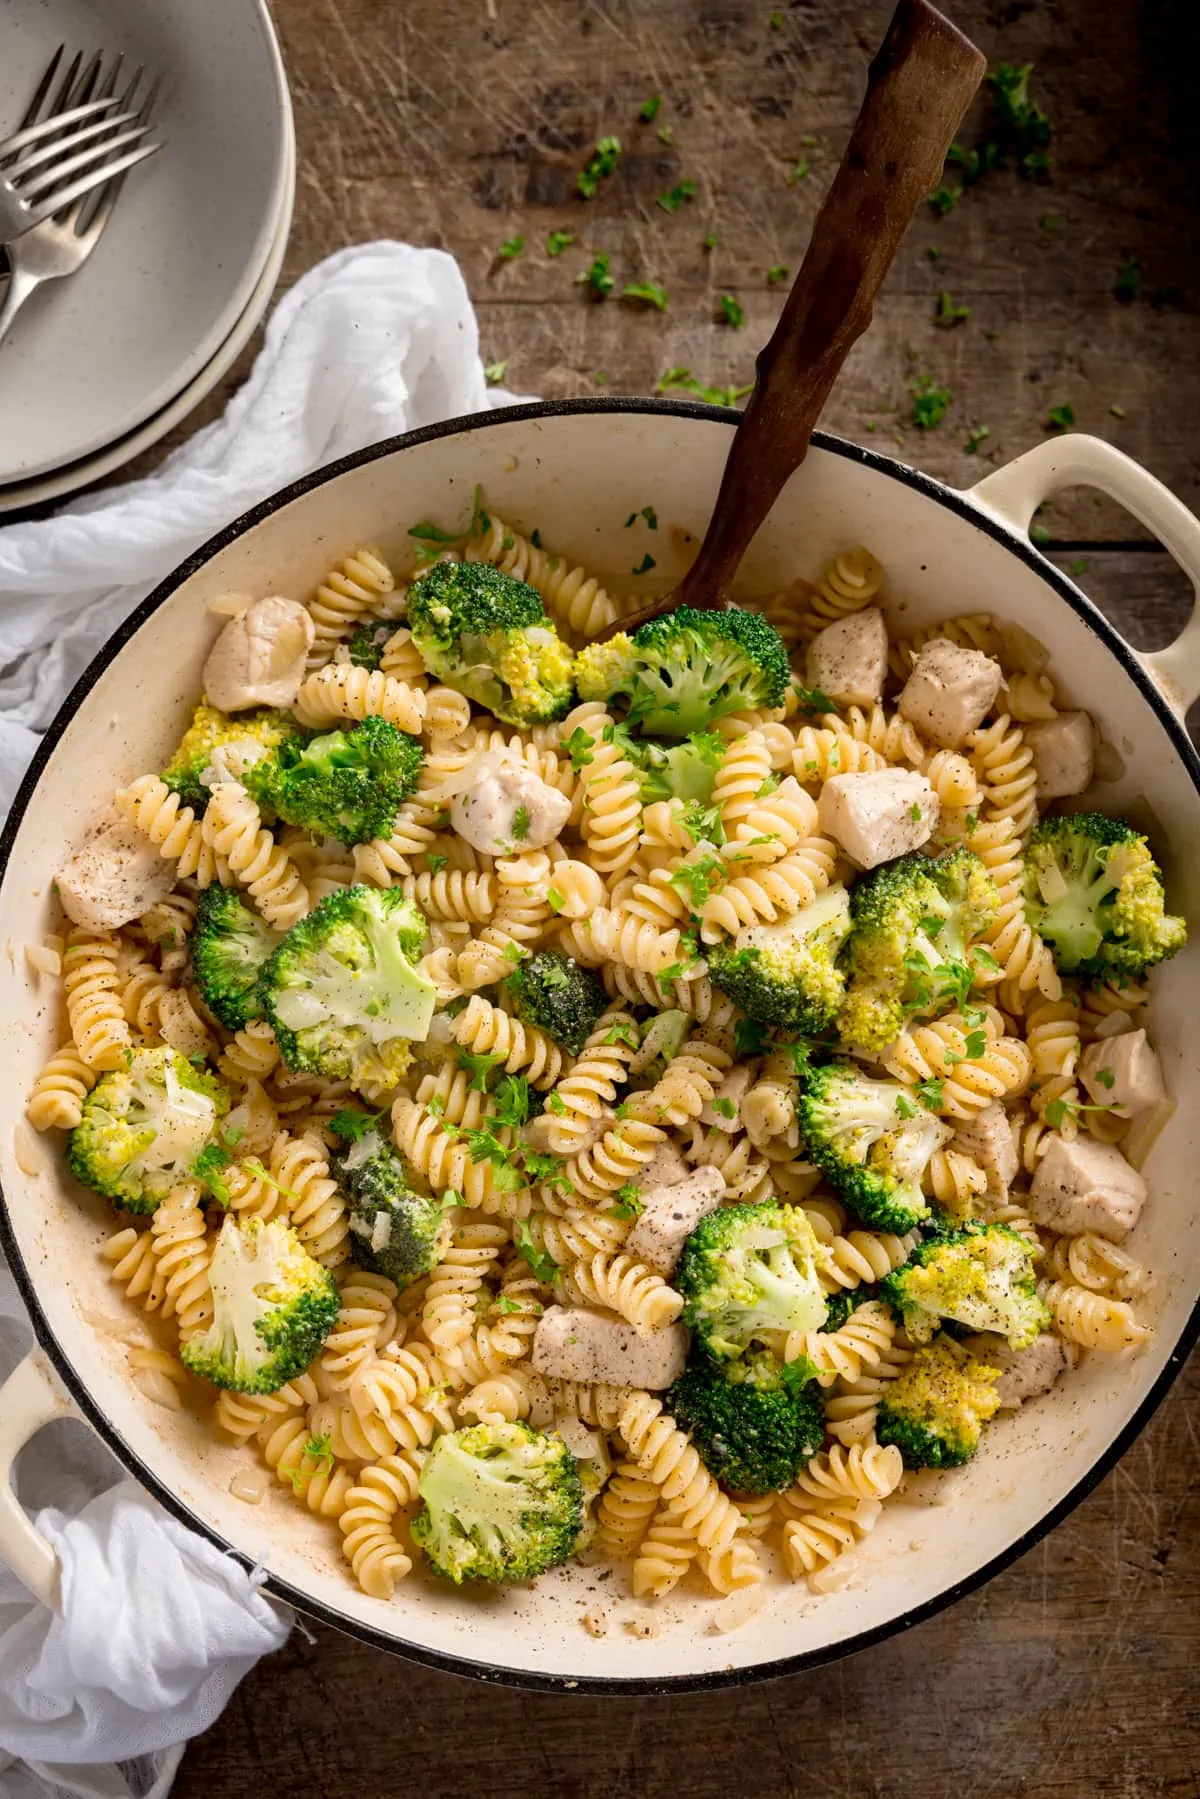 Overhead shot of chicken and broccoli pasta in a white cast iron pan with a wooden spoon sticking out. The pan is on a wooden table with a white napkin and bowls nearby.